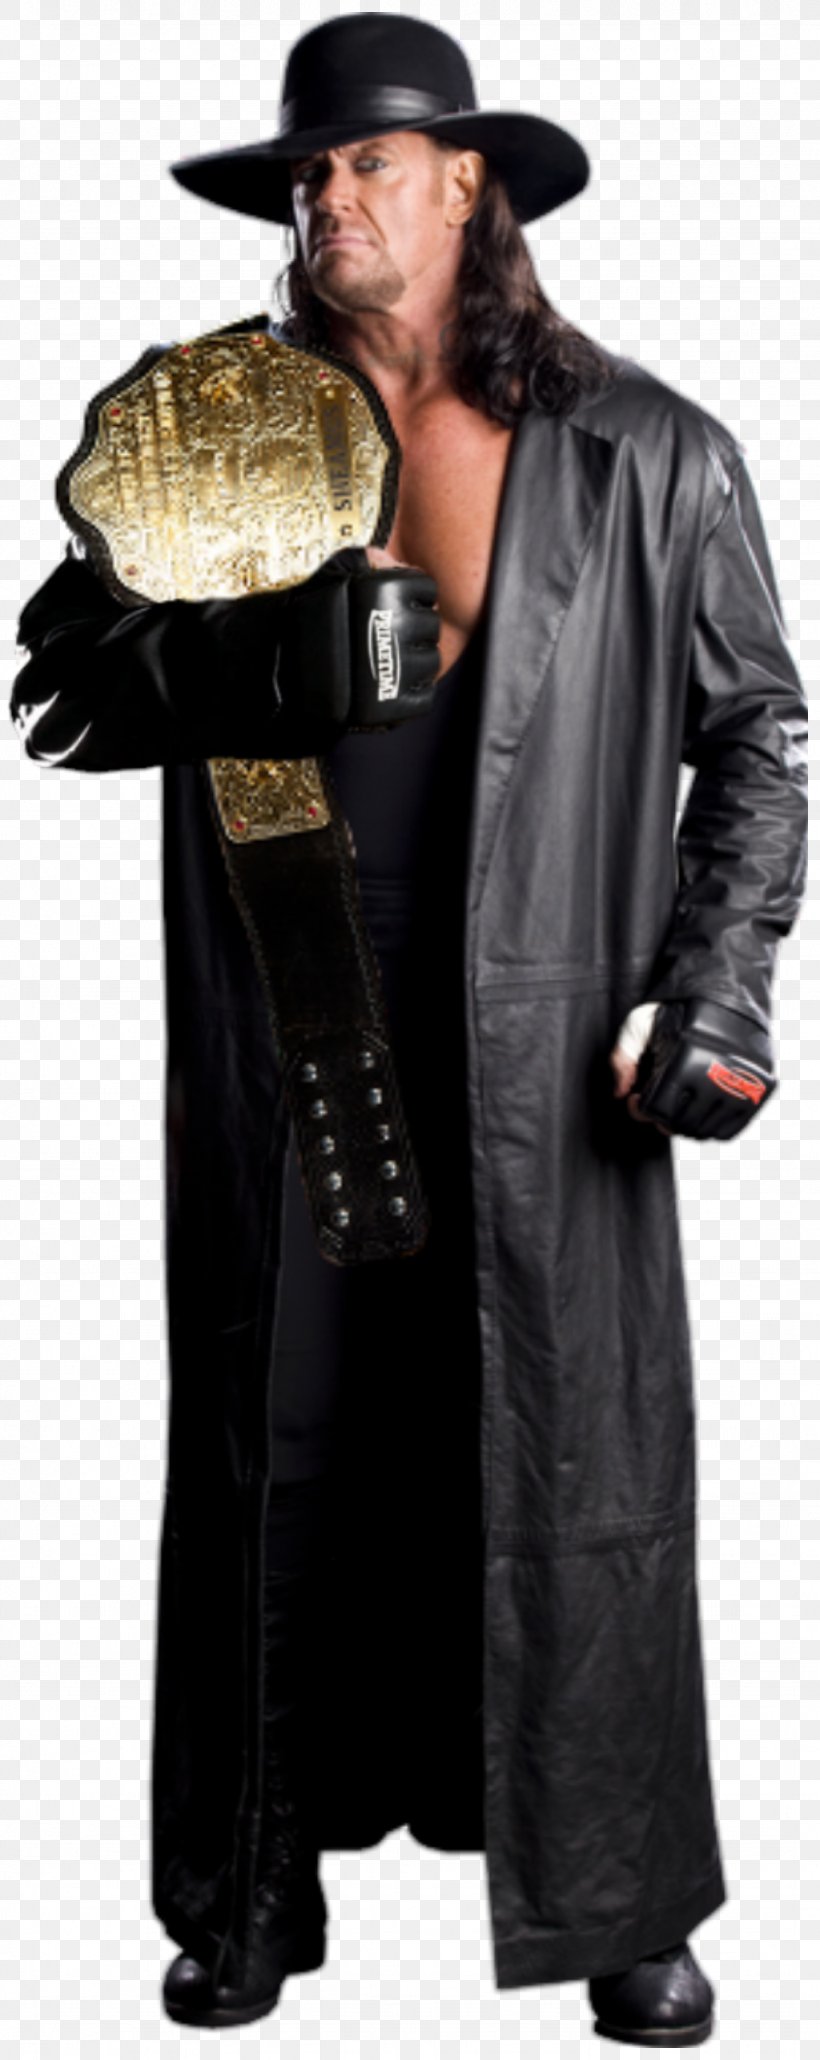 The Undertaker Leather Jacket Trench Coat Clothing, PNG, 1024x2573px, Undertaker, Clothing, Clothing Sizes, Coat, Costume Download Free